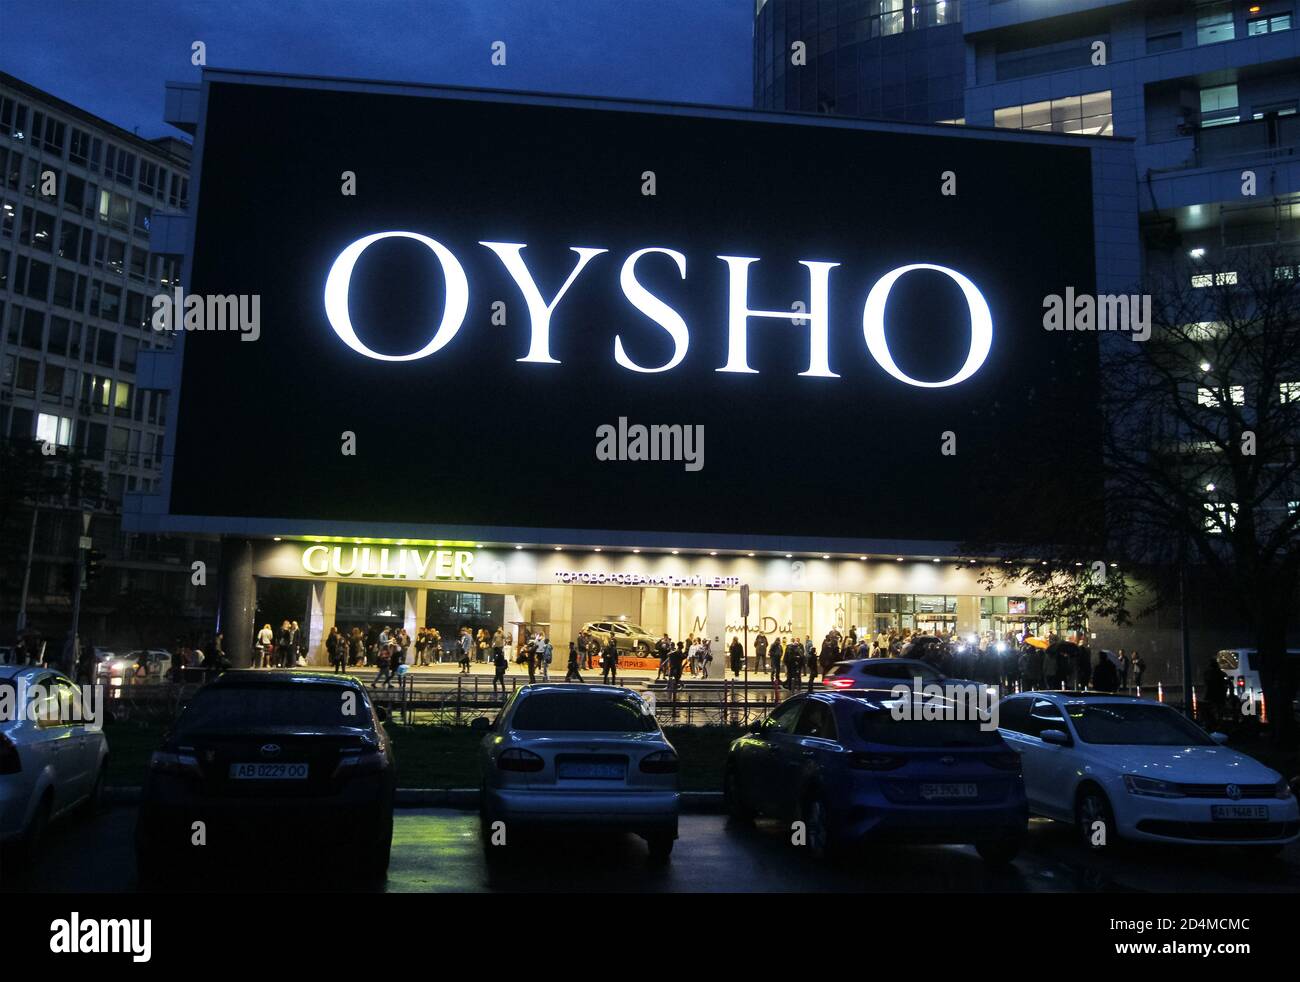 A huge screen shows the logo Oysho on a shopping mall building in downtown  Kiev Stock Photo - Alamy